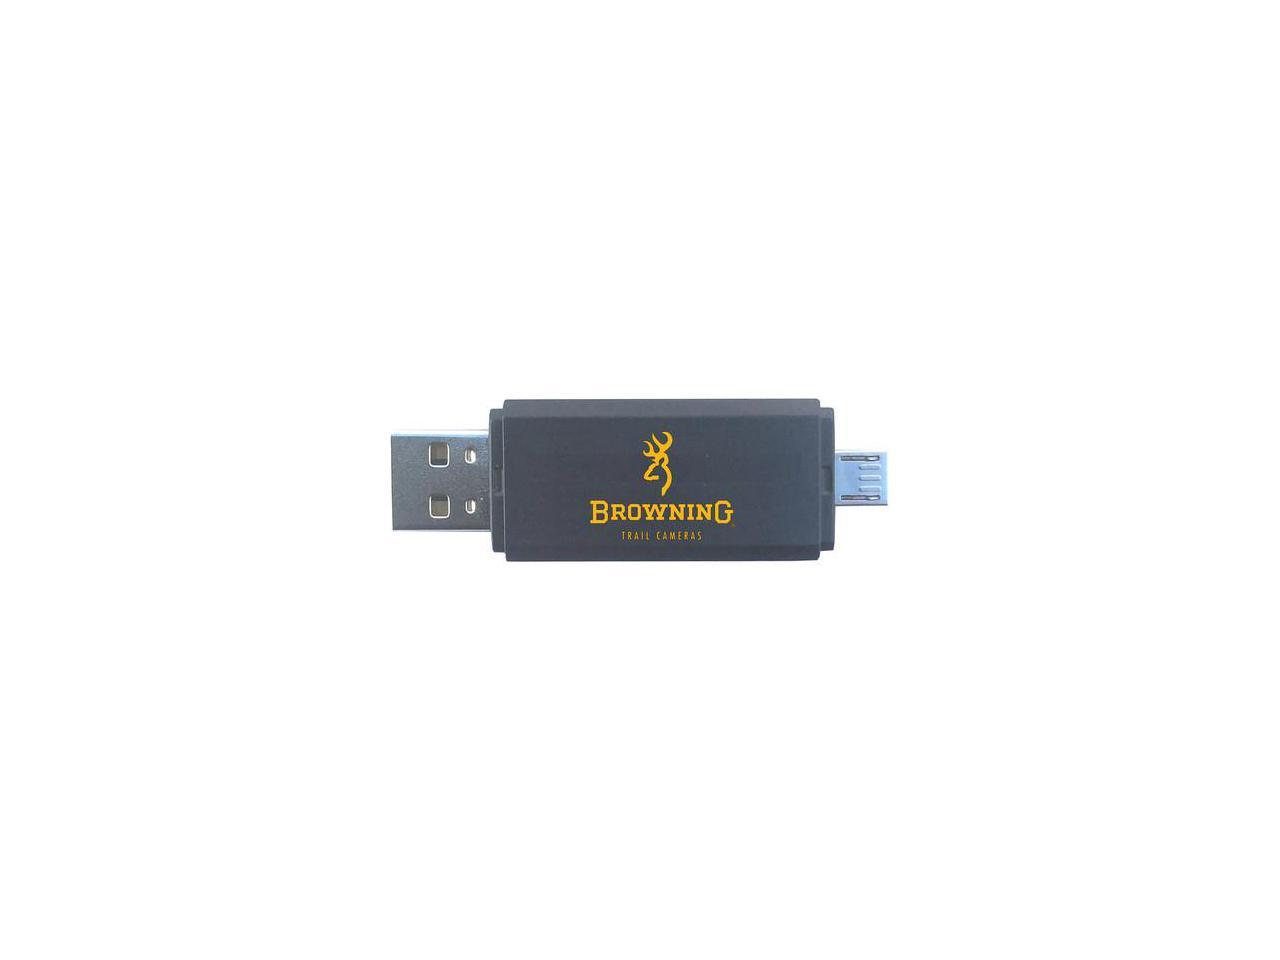 Browning SD Card Reader For Android Card Reader